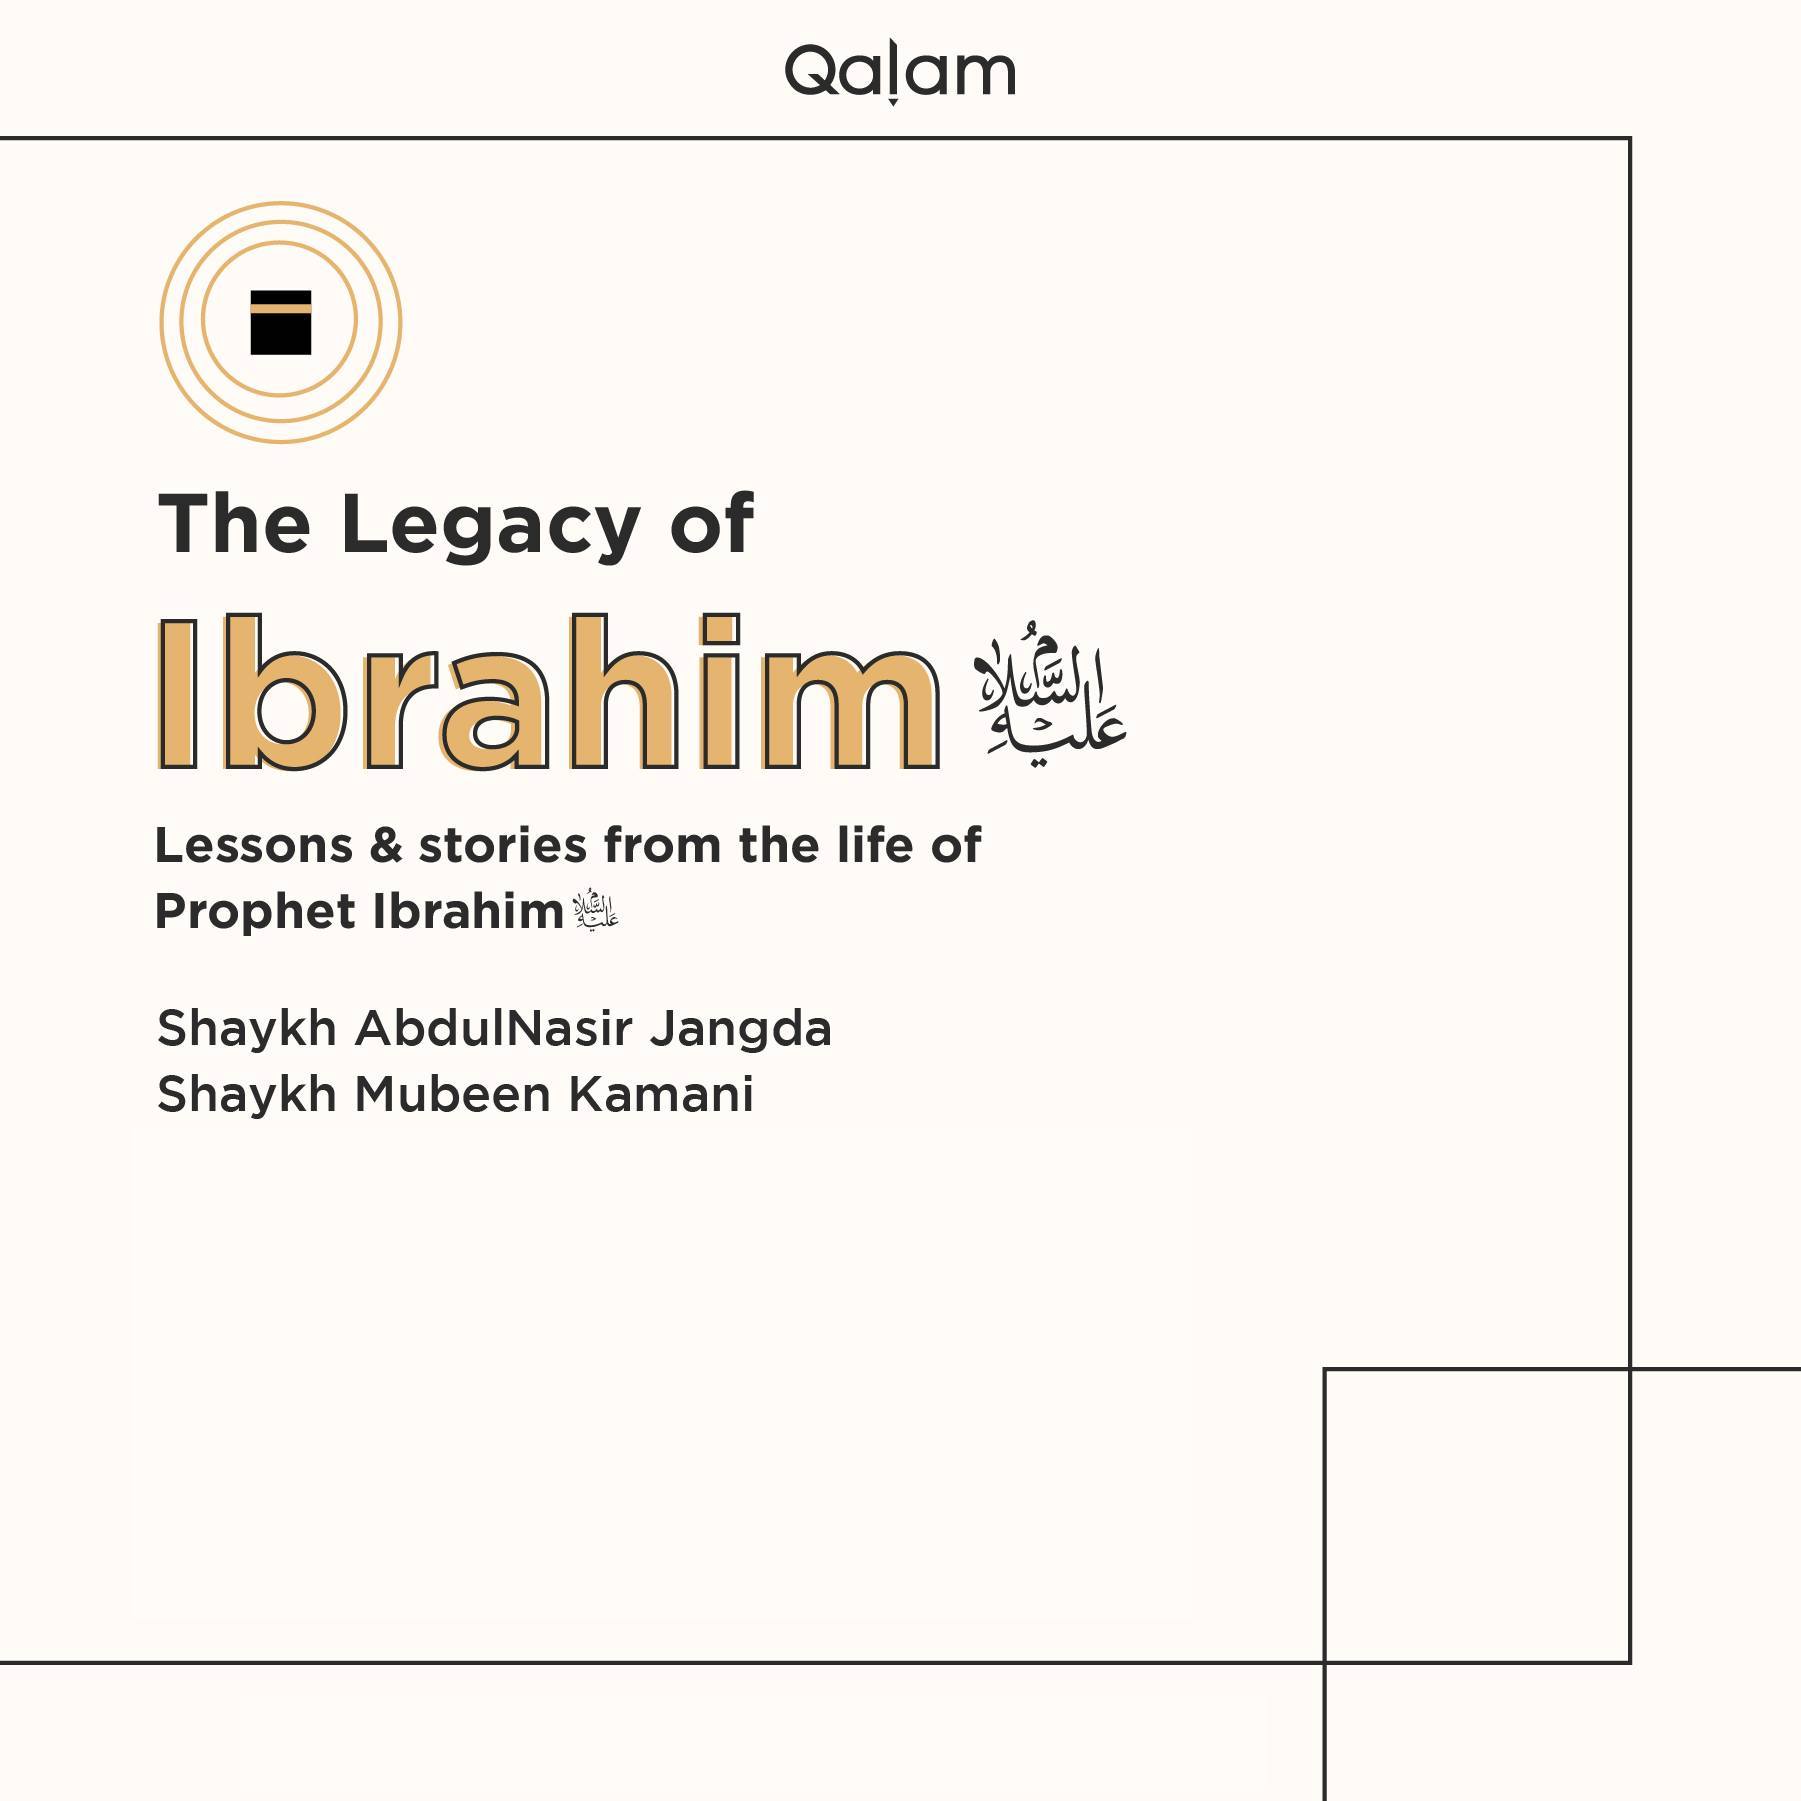 The Legacy of Ibrahim AS